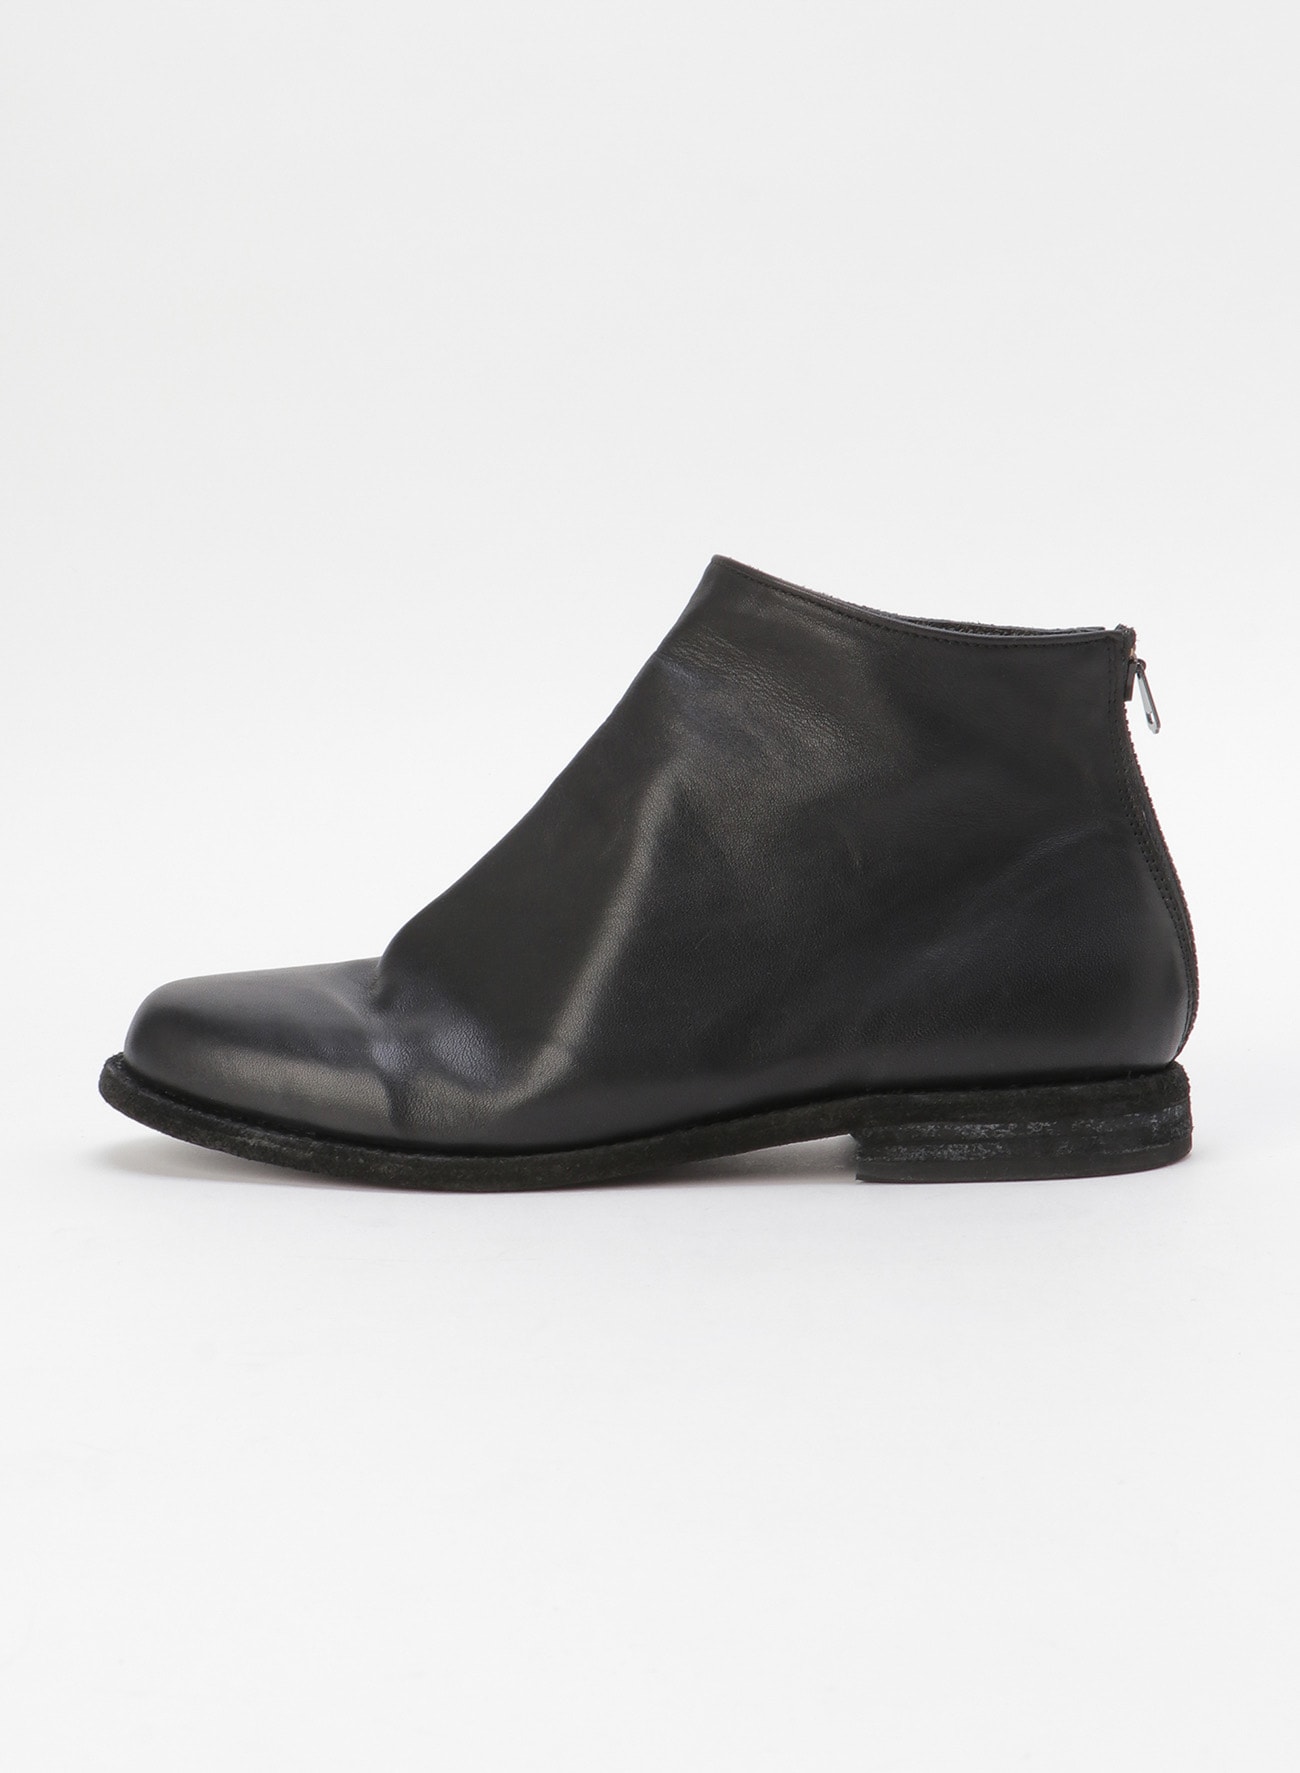 SOFT LEATHER LOW CUT BOOTS WITH BACK ZIPPER(US 3.5 Black): Vintage